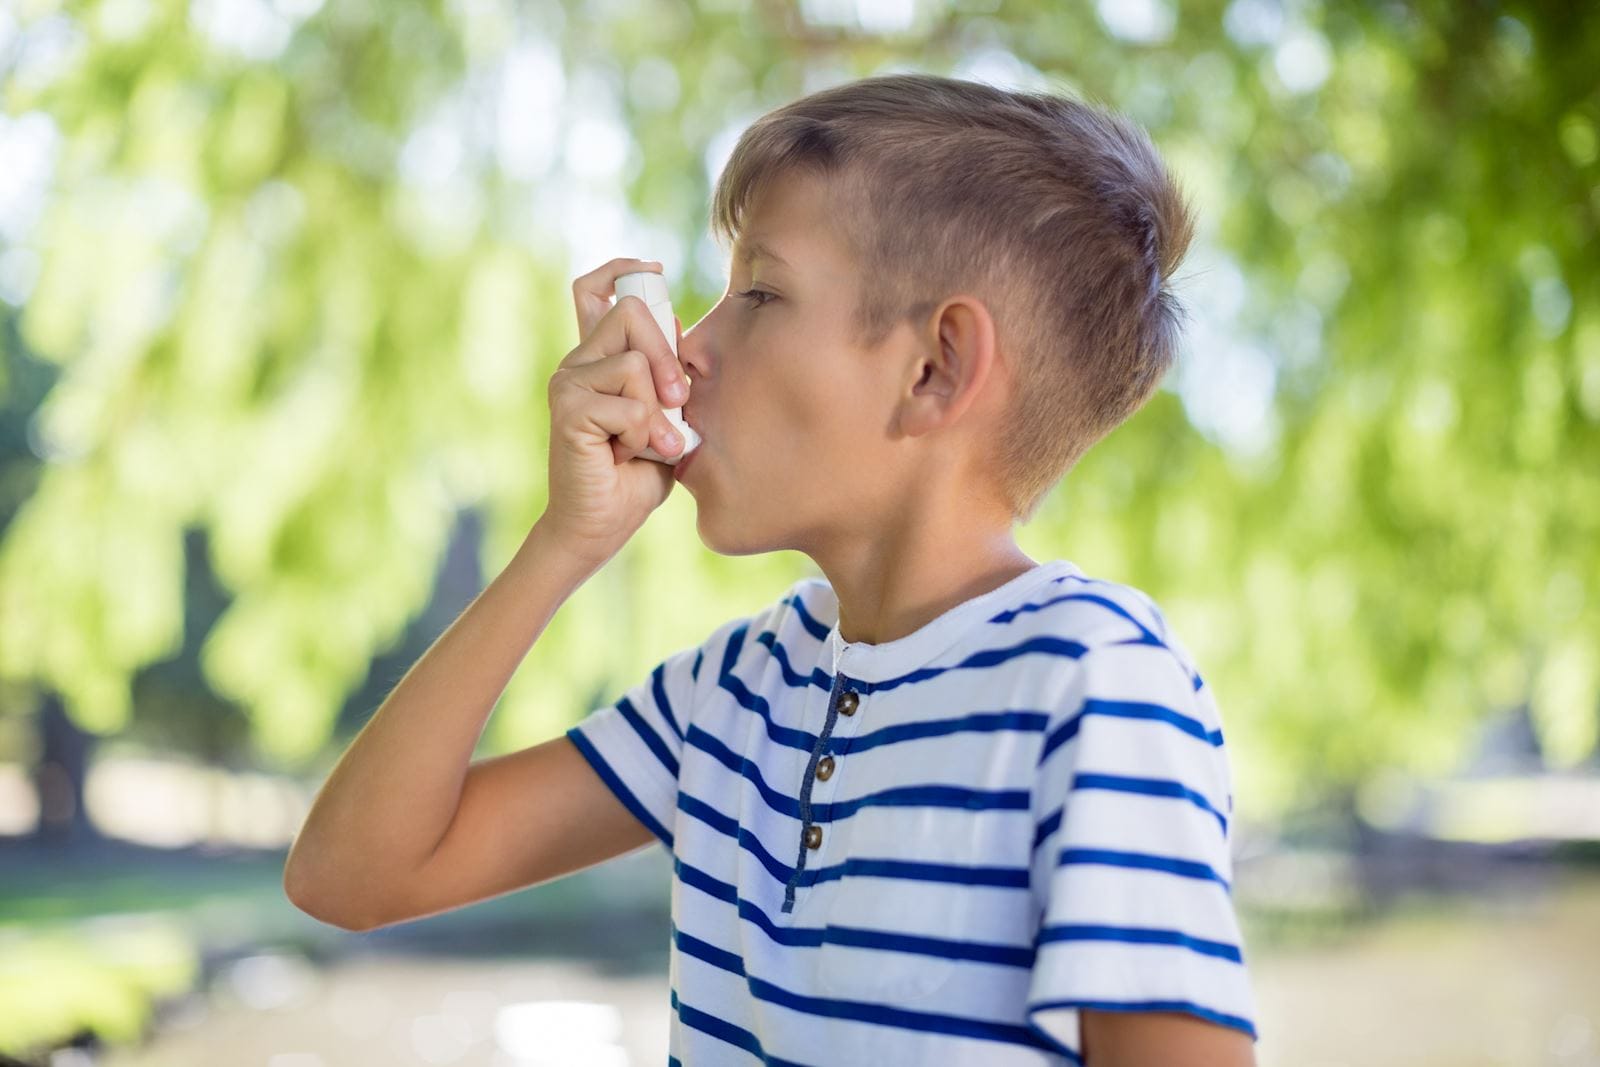 Manage Your Child's Asthma in the Summer Heat and Humidity